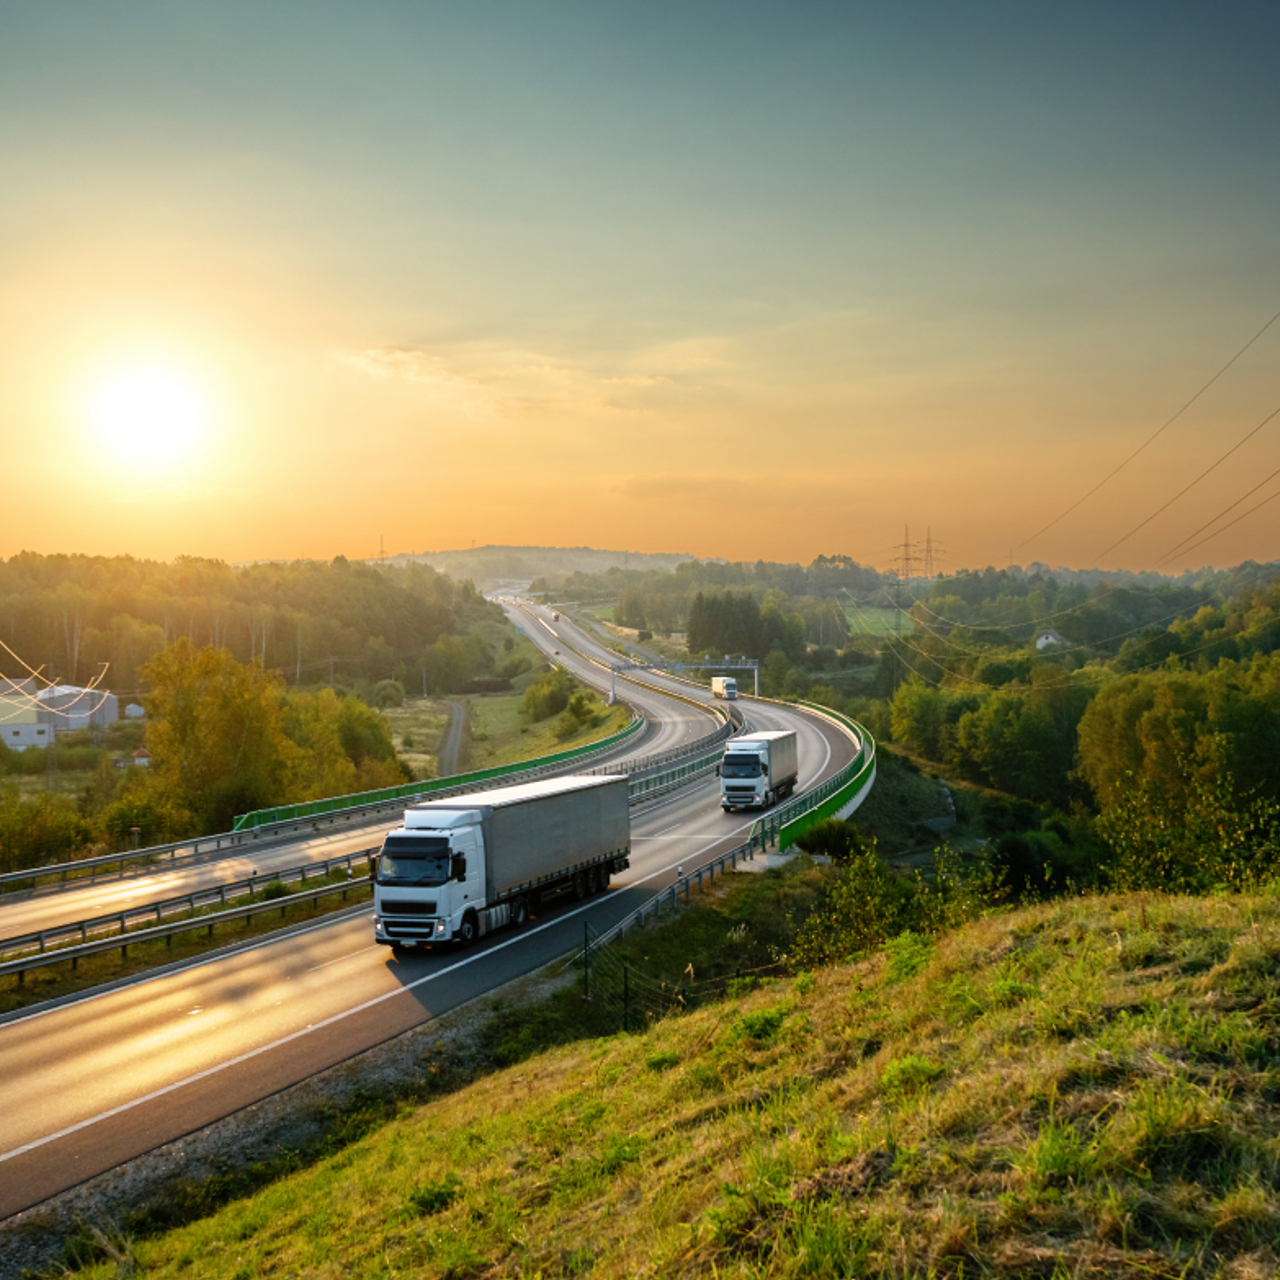 Early morning highway scene with two white trucks driving, a sunrise background with greenery, and power lines in the distance.